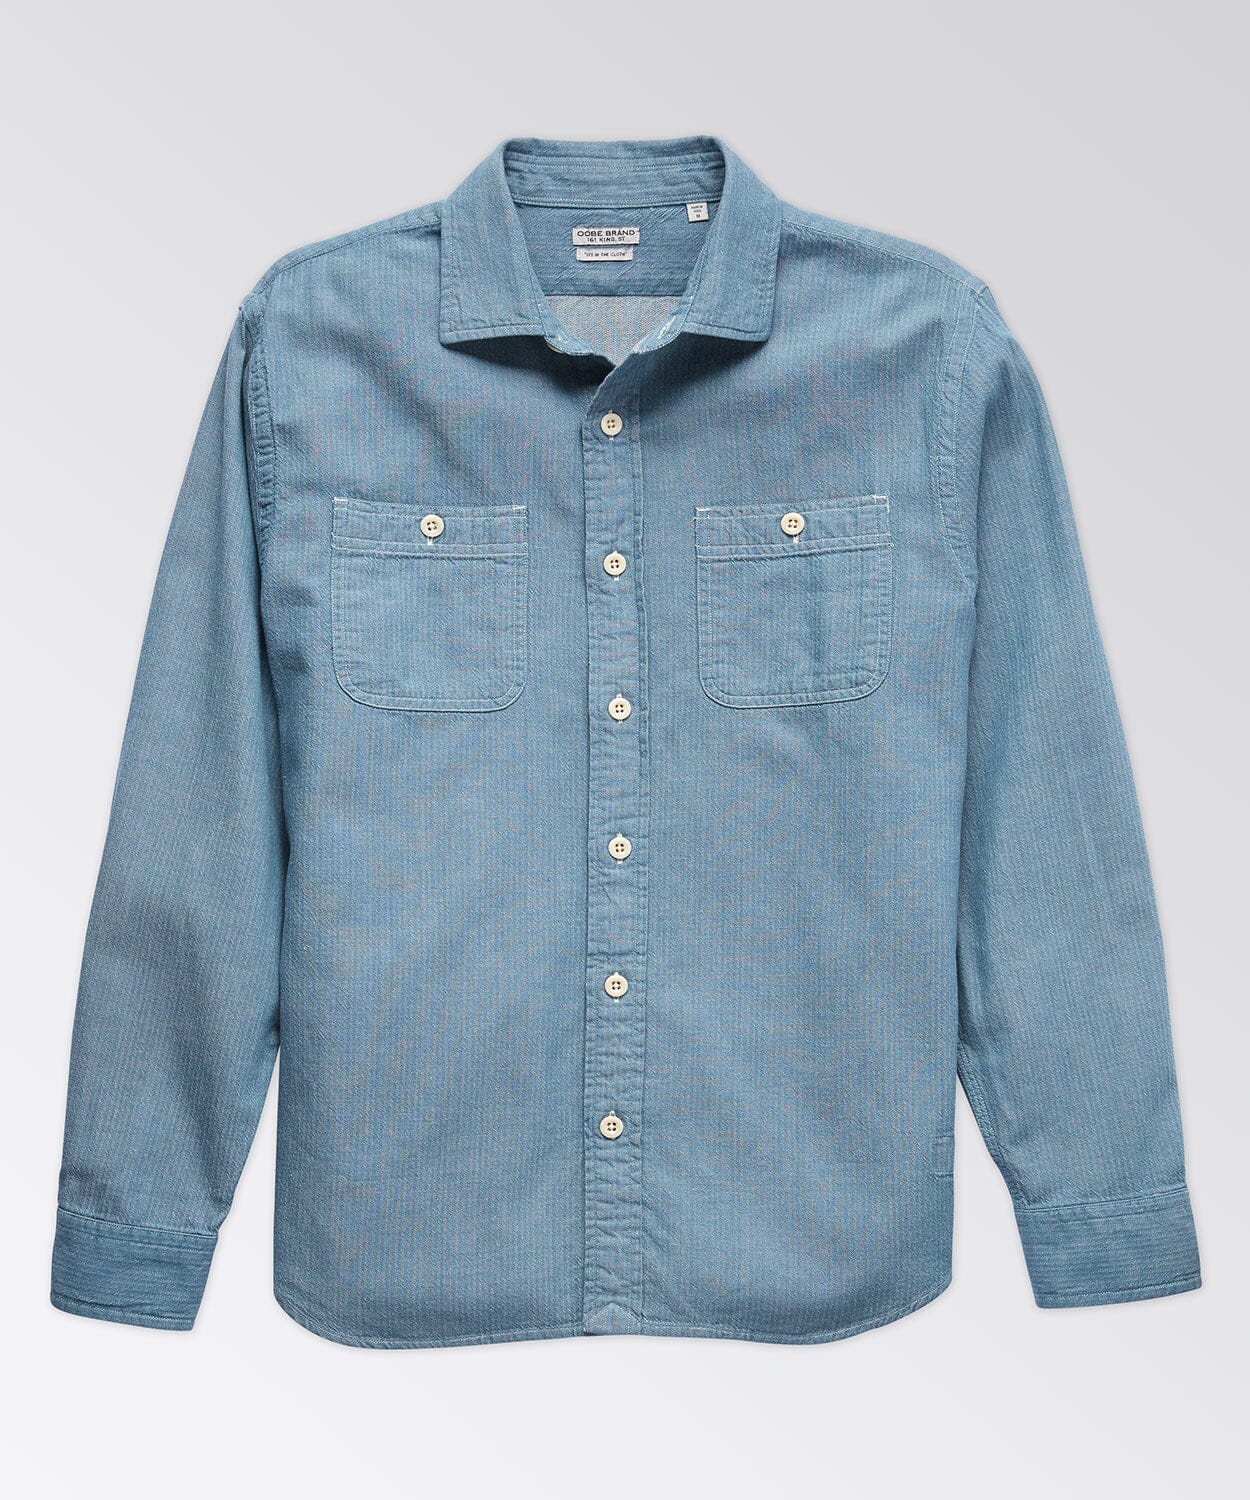 Marlan Workshirt Button Downs OOBE BRAND Chambray S 